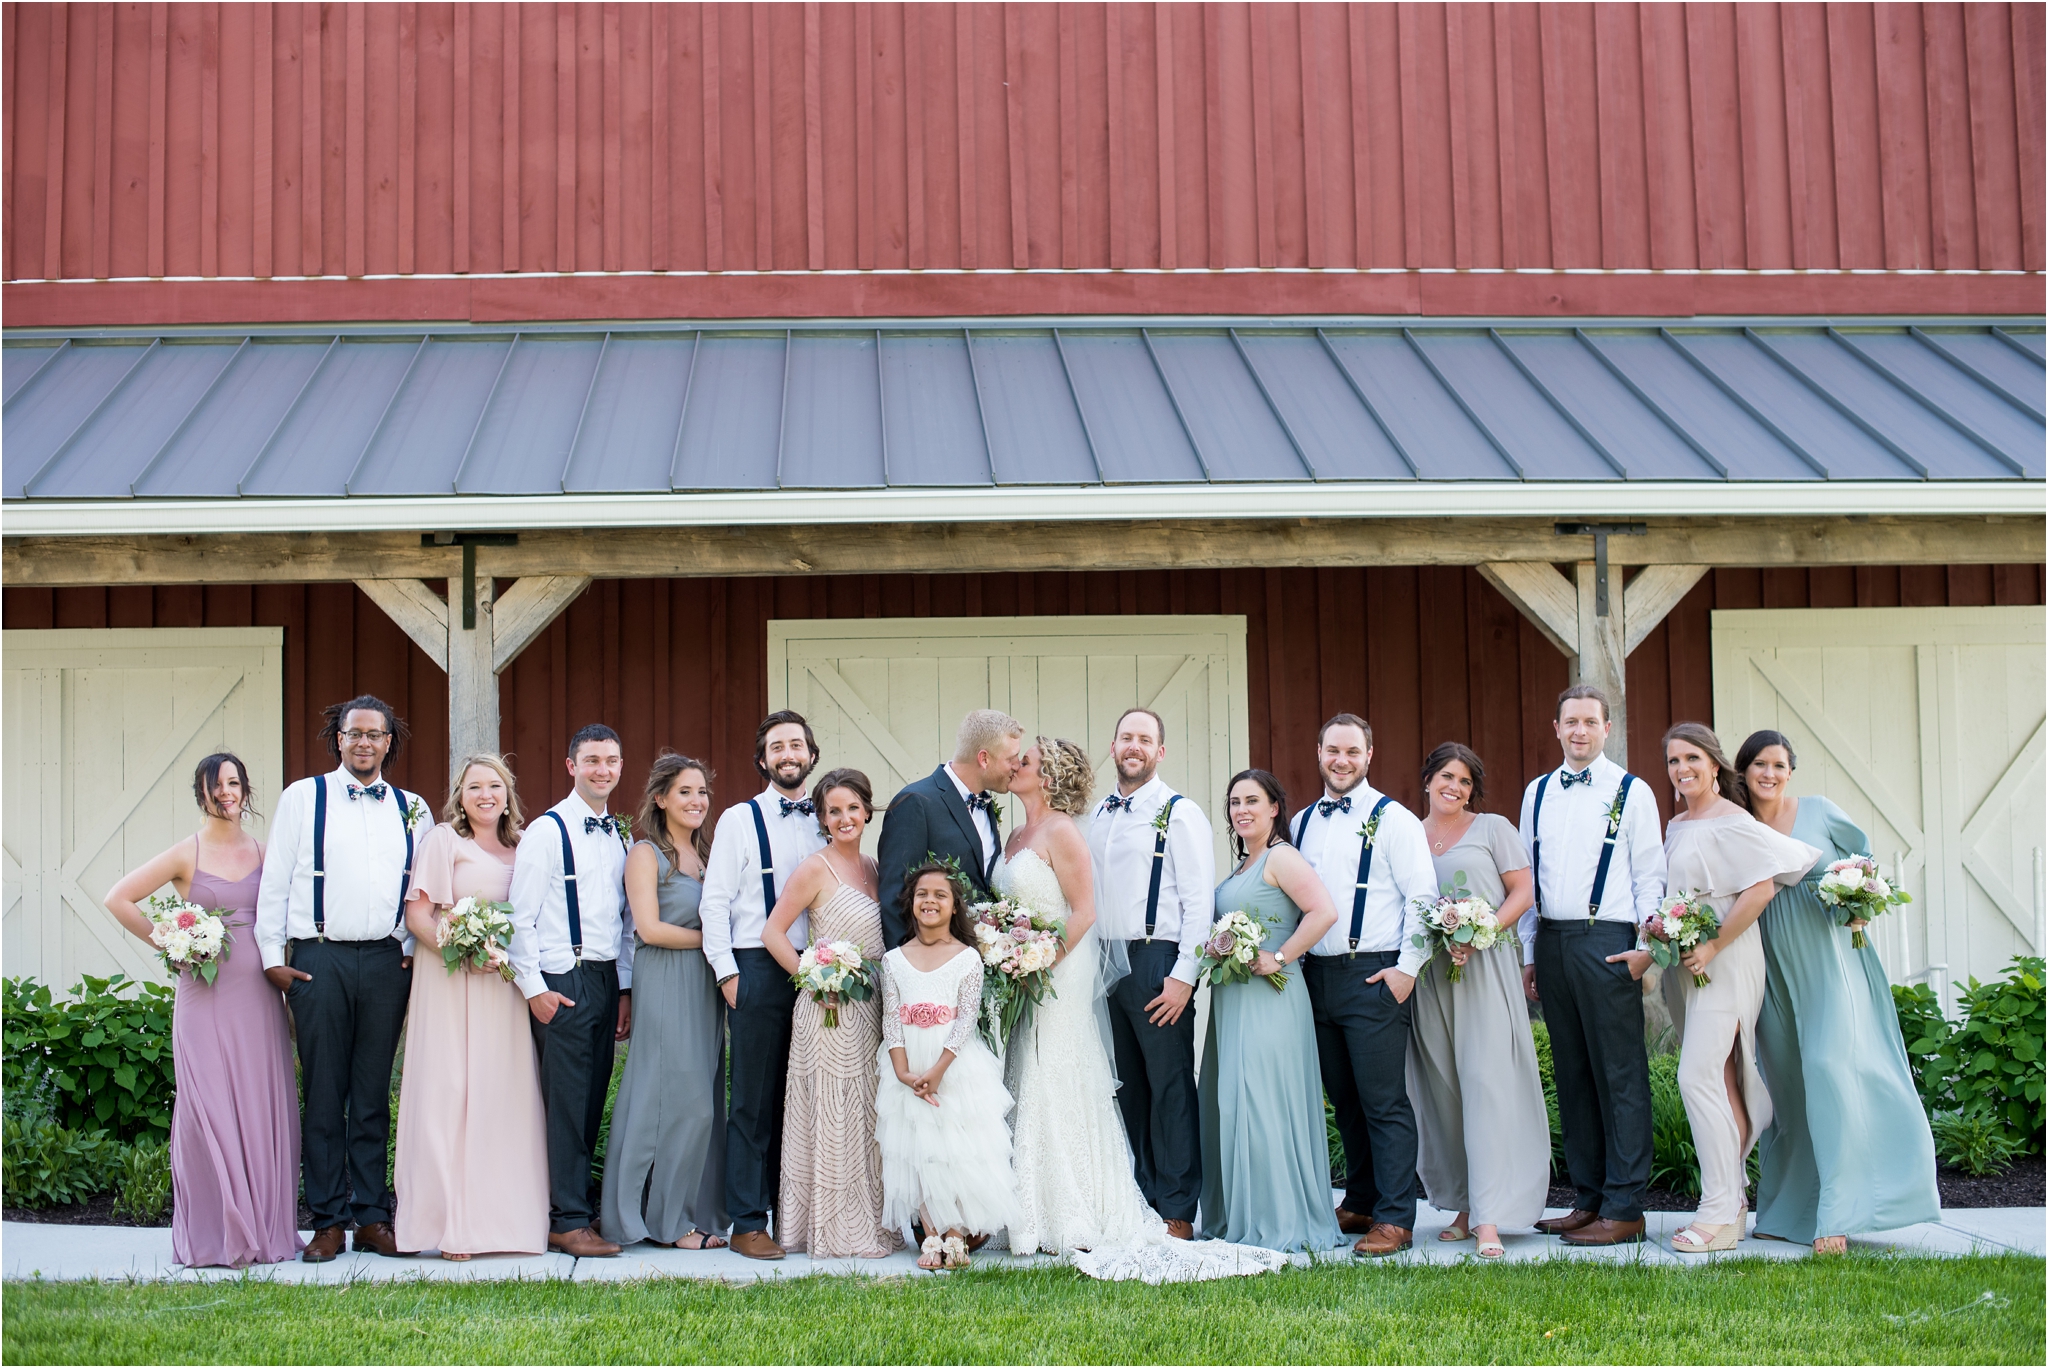 Lindley Farmstead at Chatham Hills | Sarah and Rachel Wedding Photographers | Westfield, Indiana wedding | bridal party in blush gowns